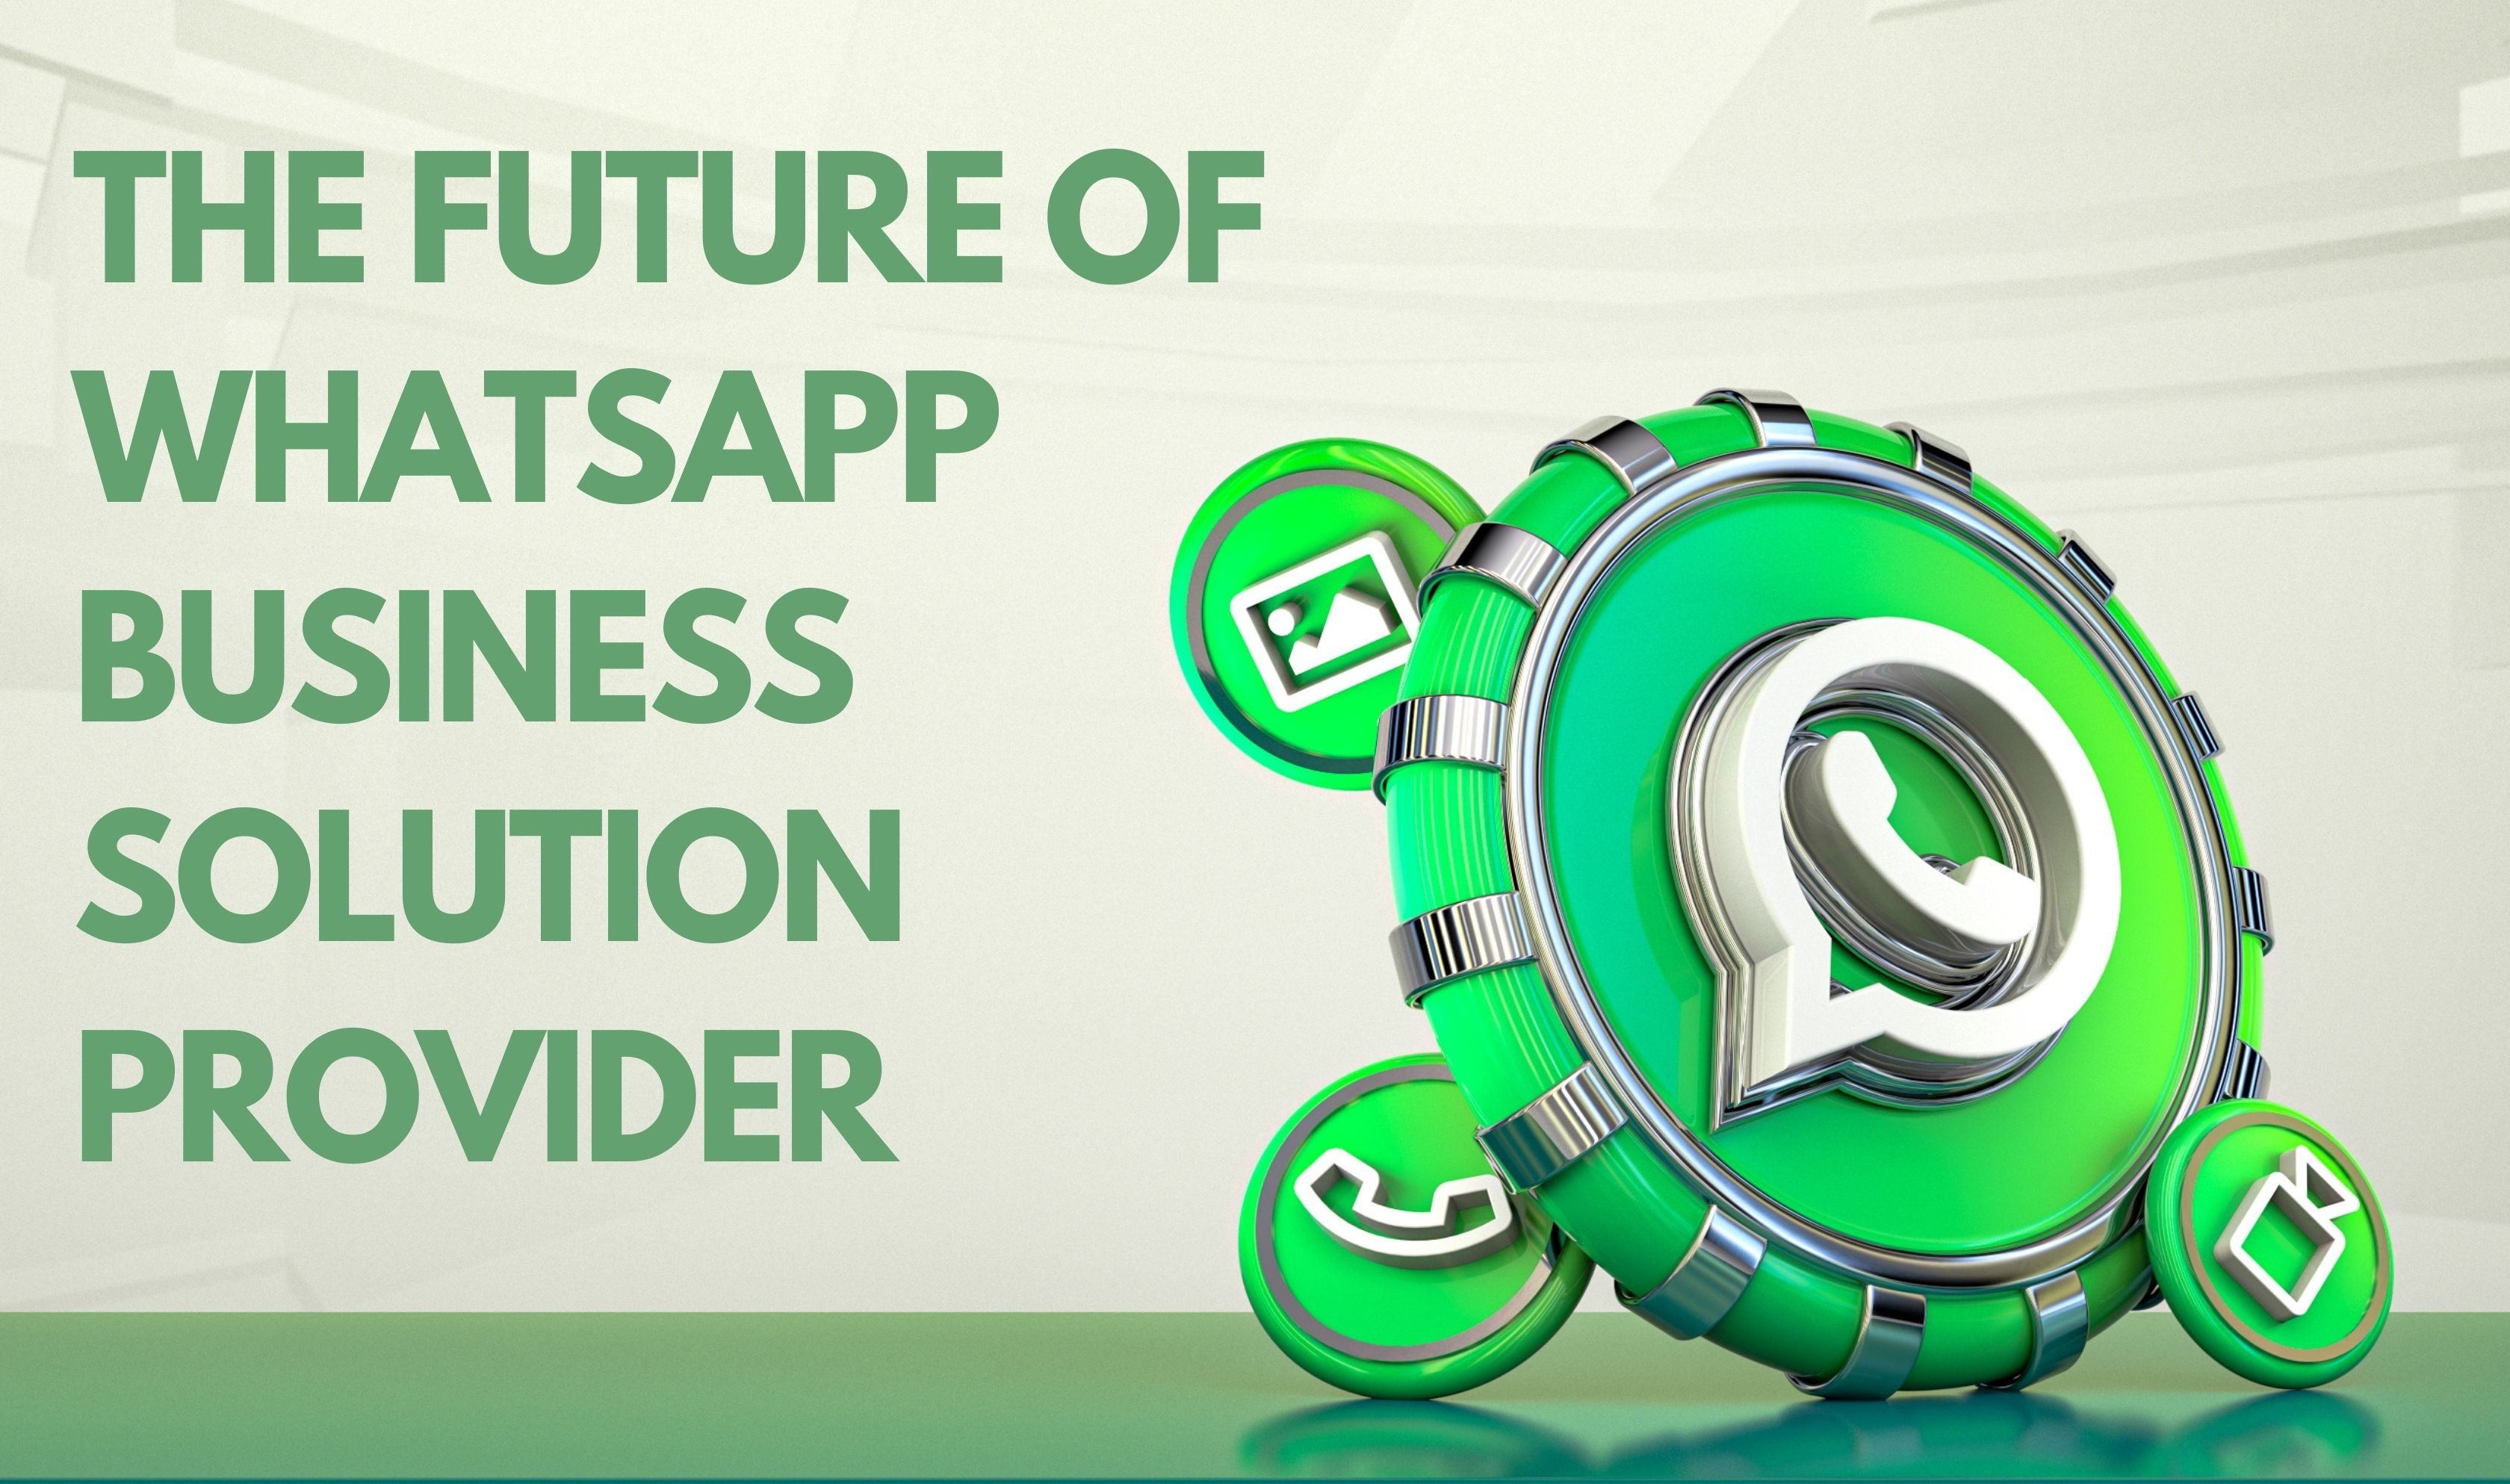 The Future of WhatsApp business solution provider